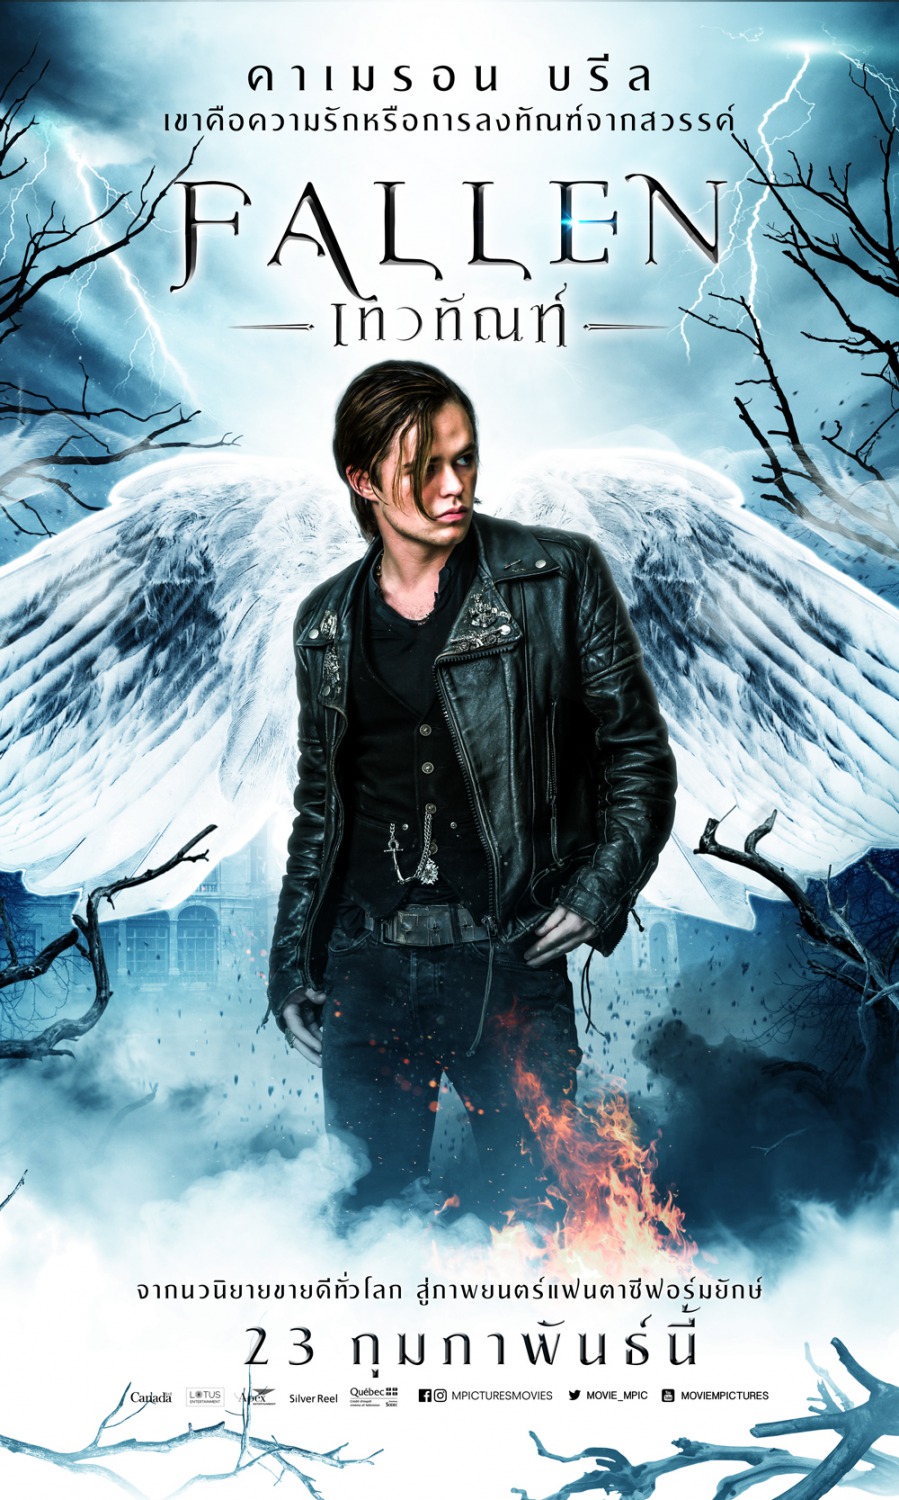 Extra Large Movie Poster Image for Fallen (#4 of 5)